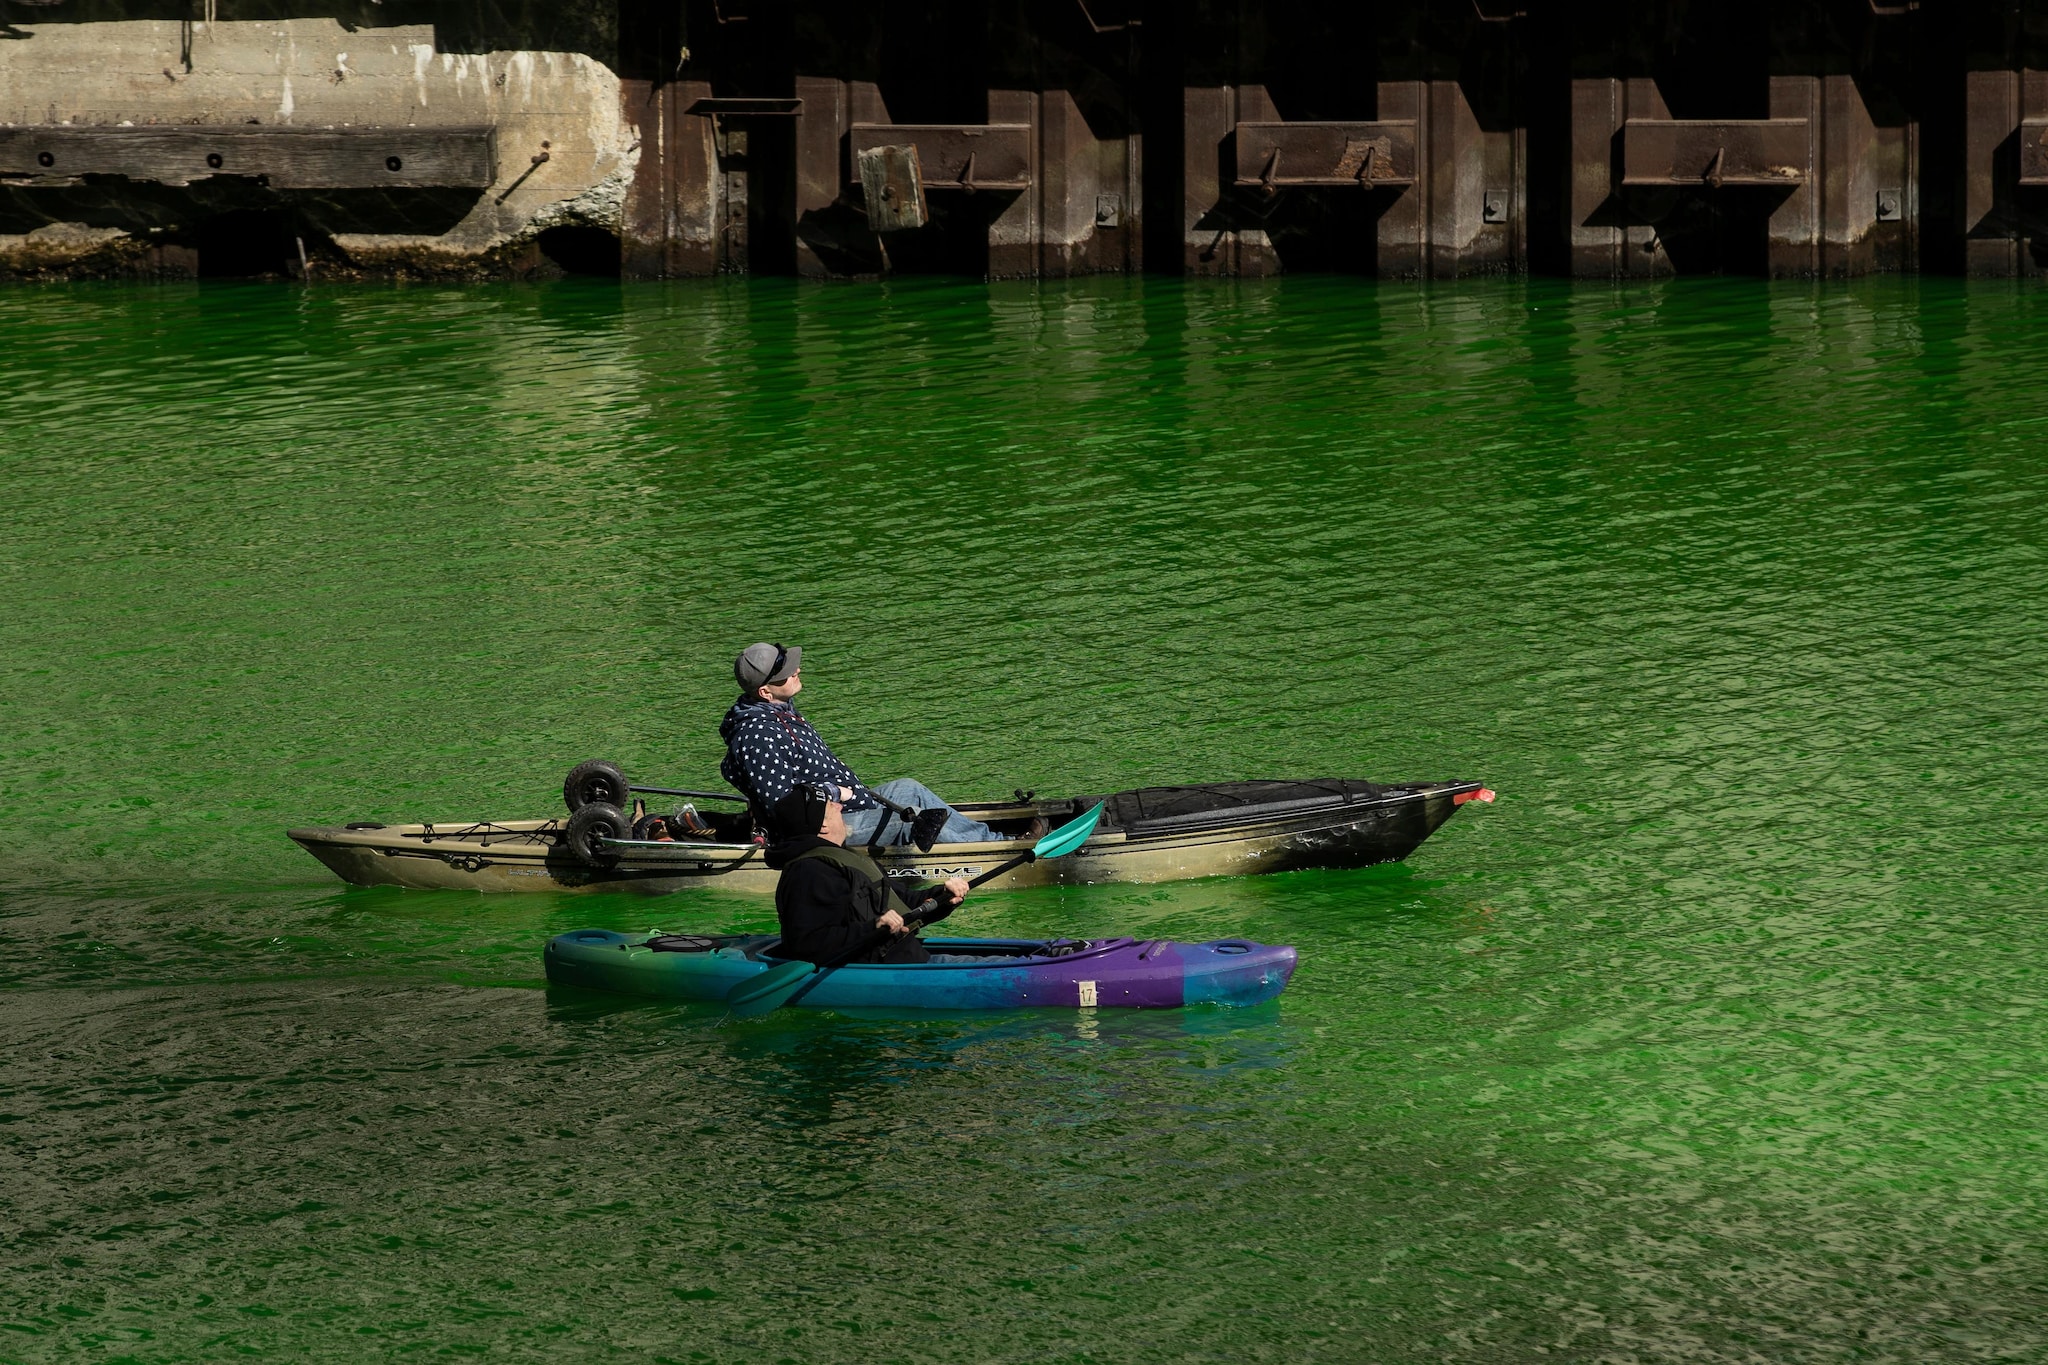 Kayaks on the Chicago River Green, Saint Patrick's Day Stock Photo - Alamy